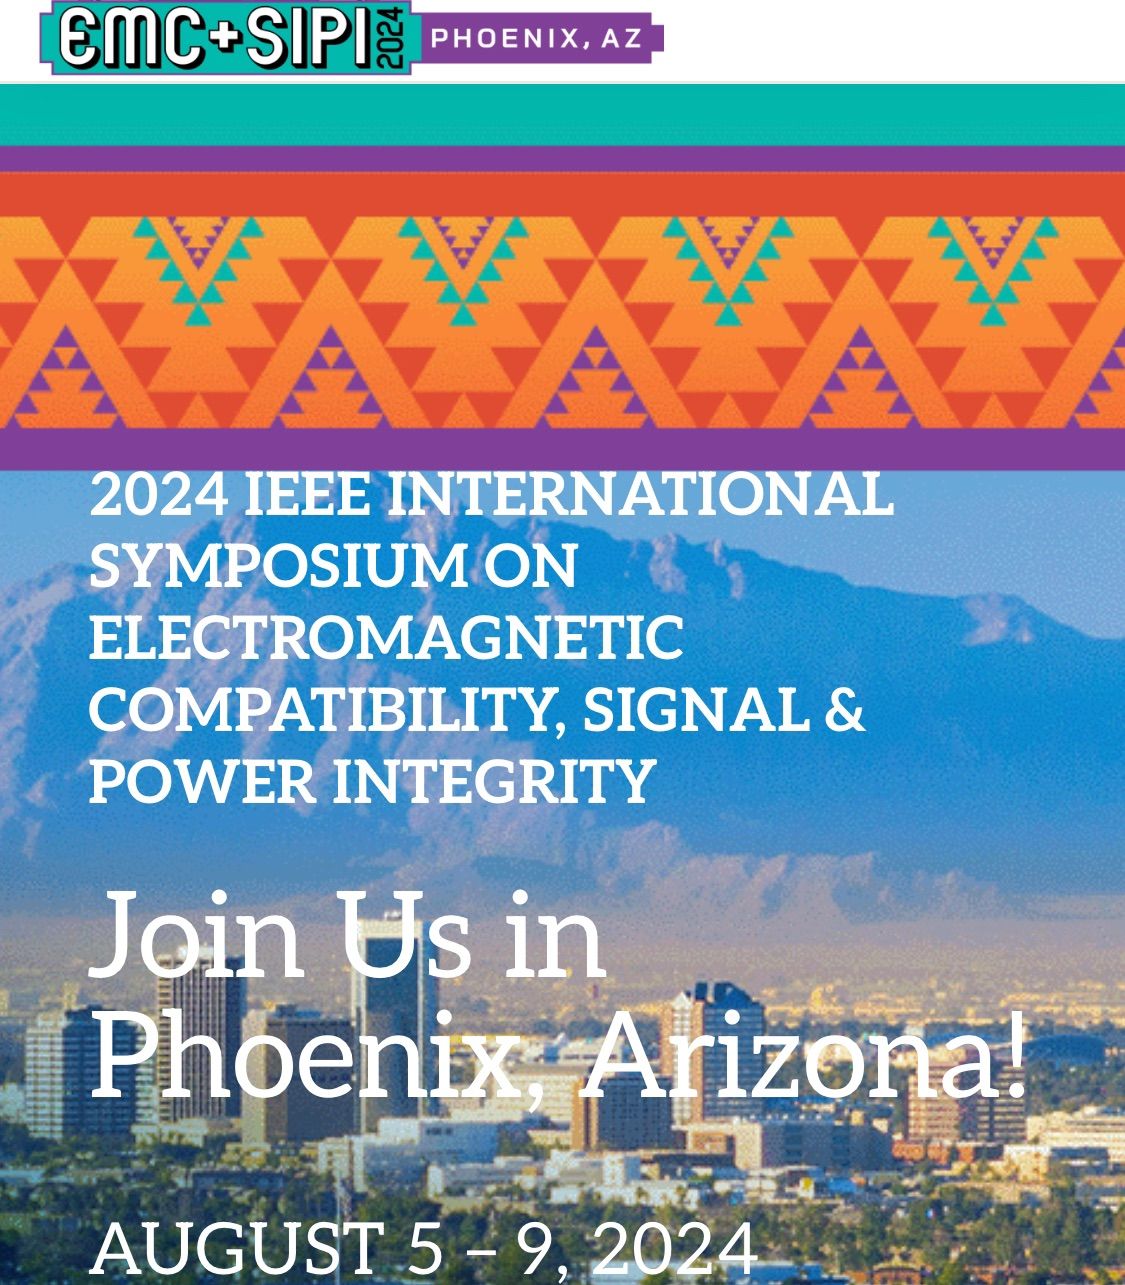 2024 IEEE INTERNATIONAL SYMPOSIUM ON ELECTROMAGNETIC COMPATIBILITY, SIGNAL & POWER INTEGRITY 